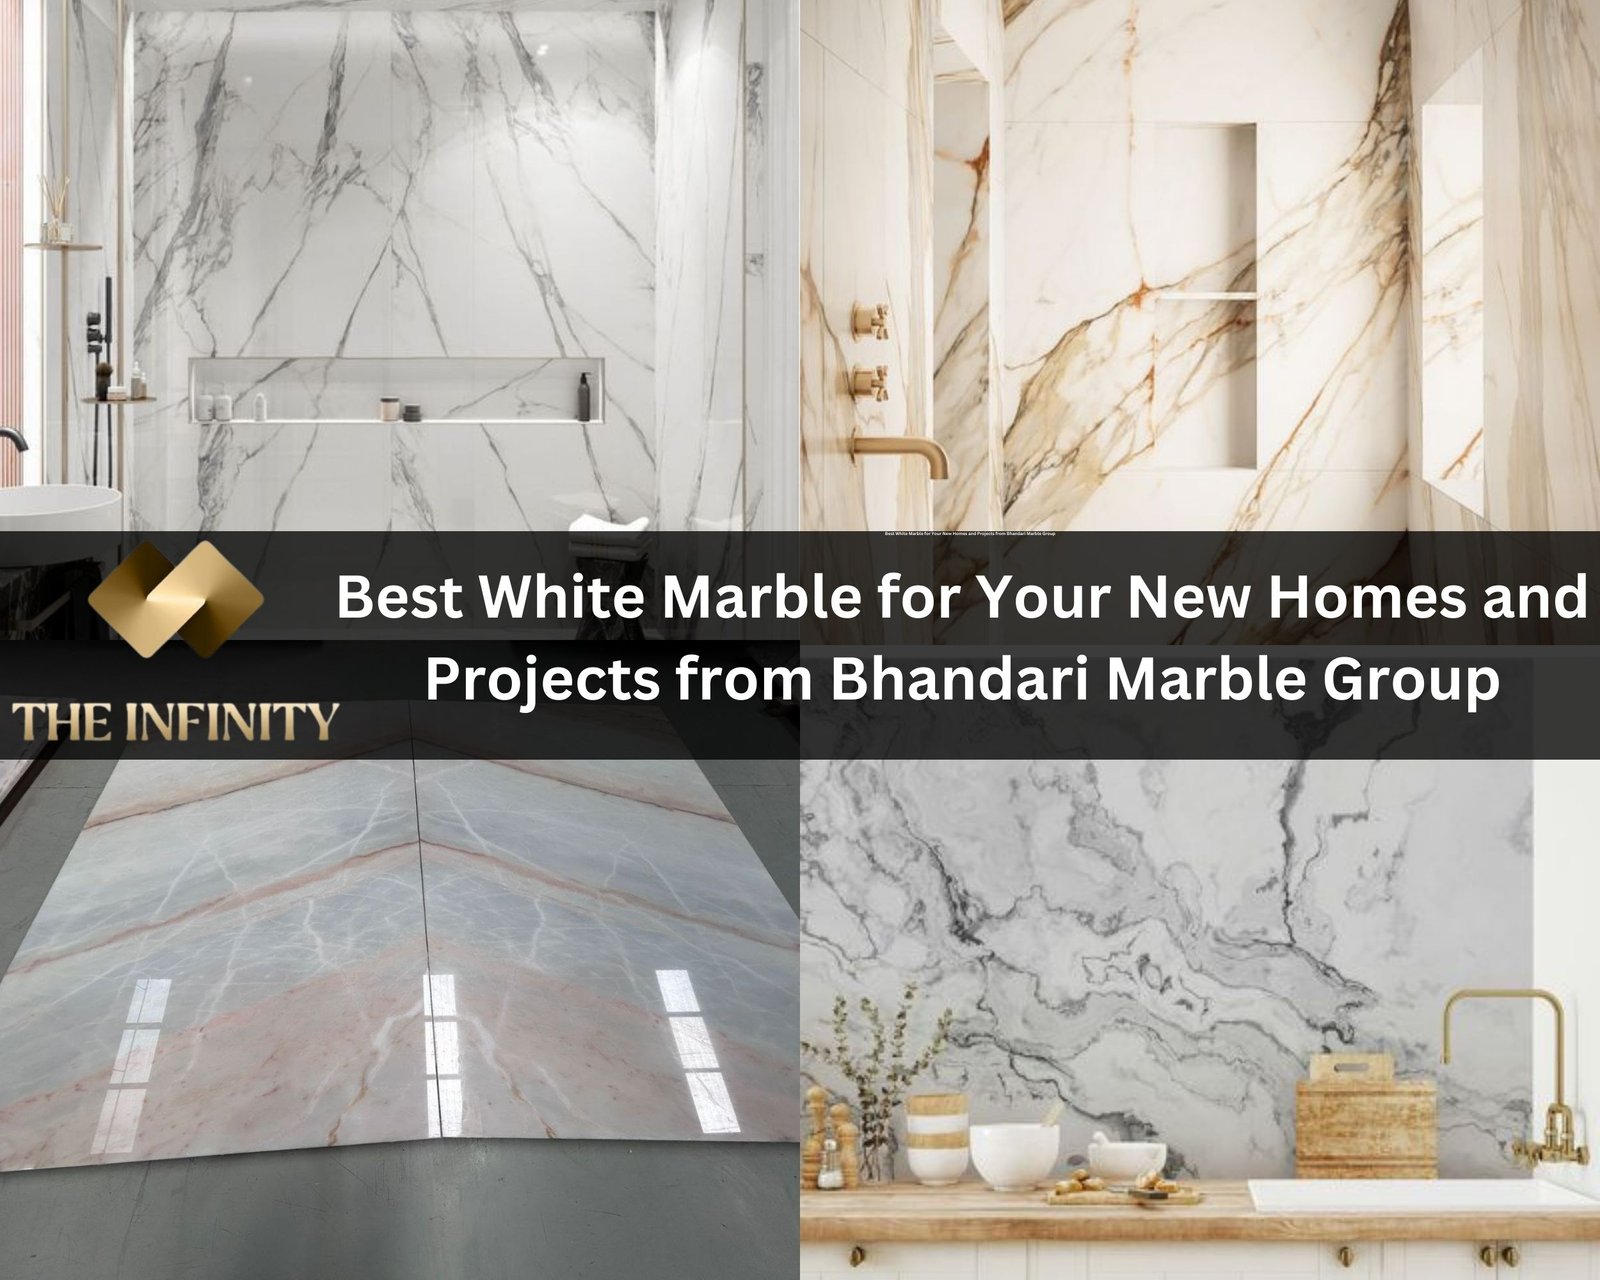 Best White Marble for Your New Homes and Projects from Bhandari Marble Group